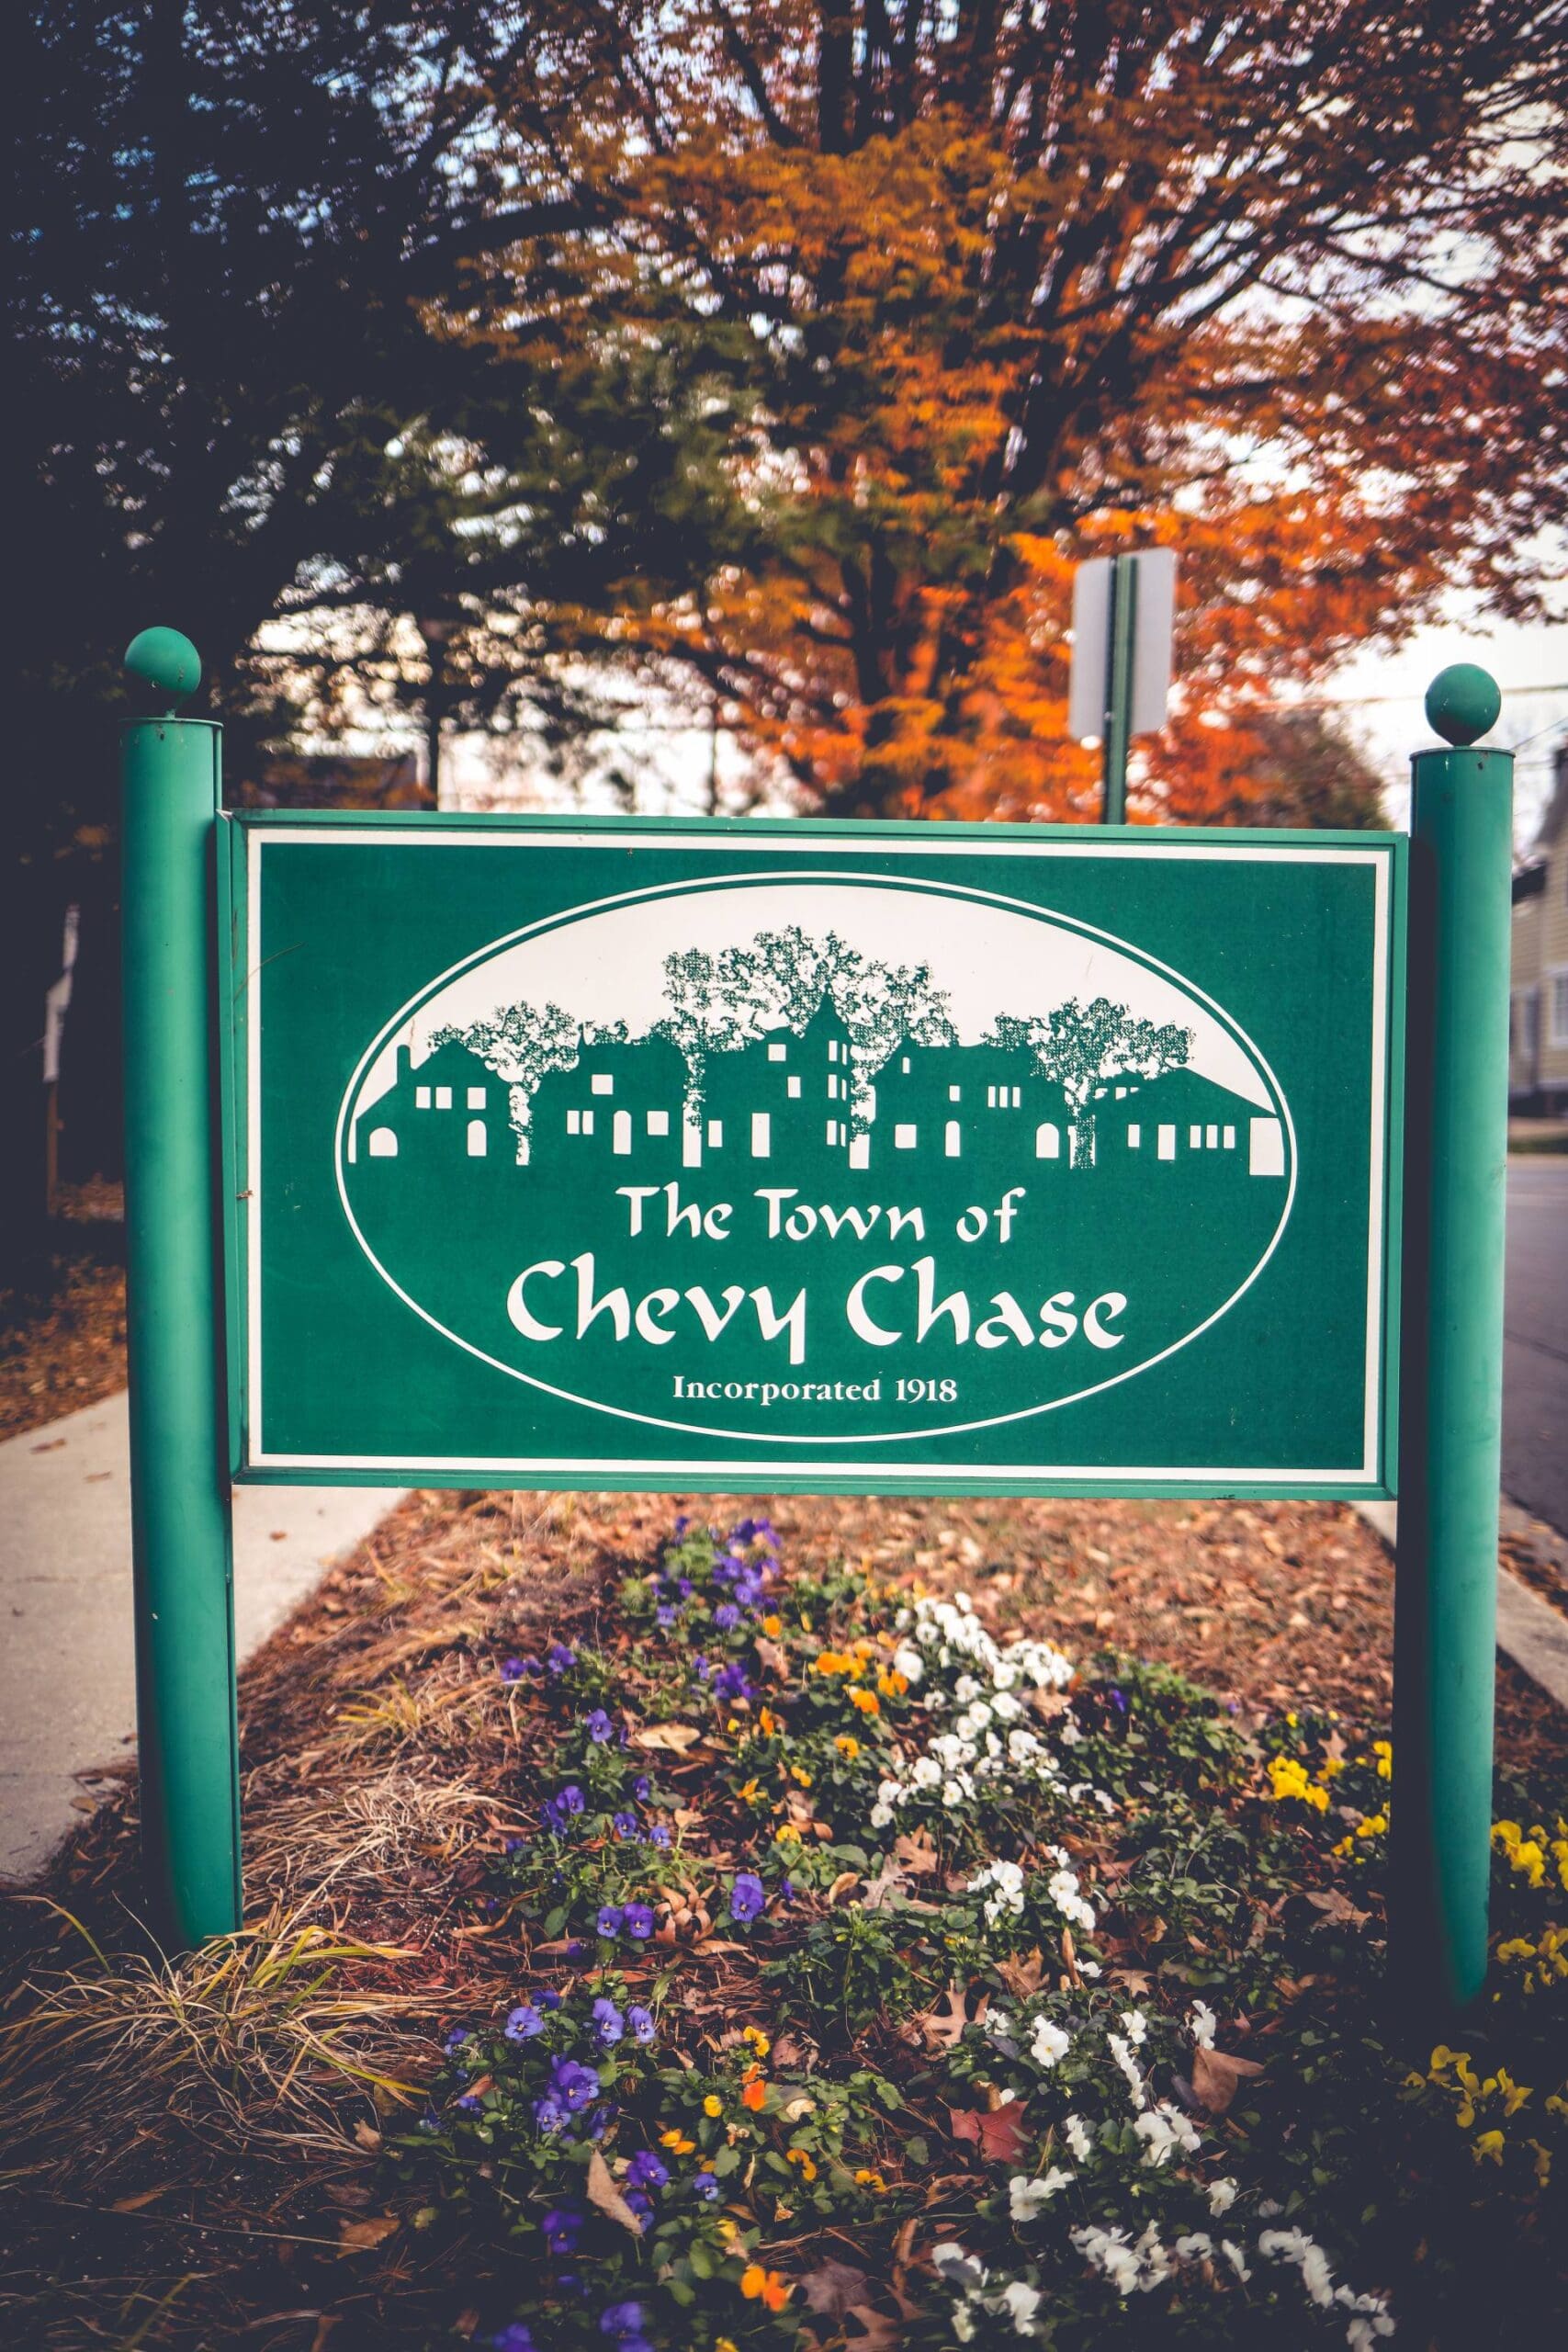 Chevy chase, MD